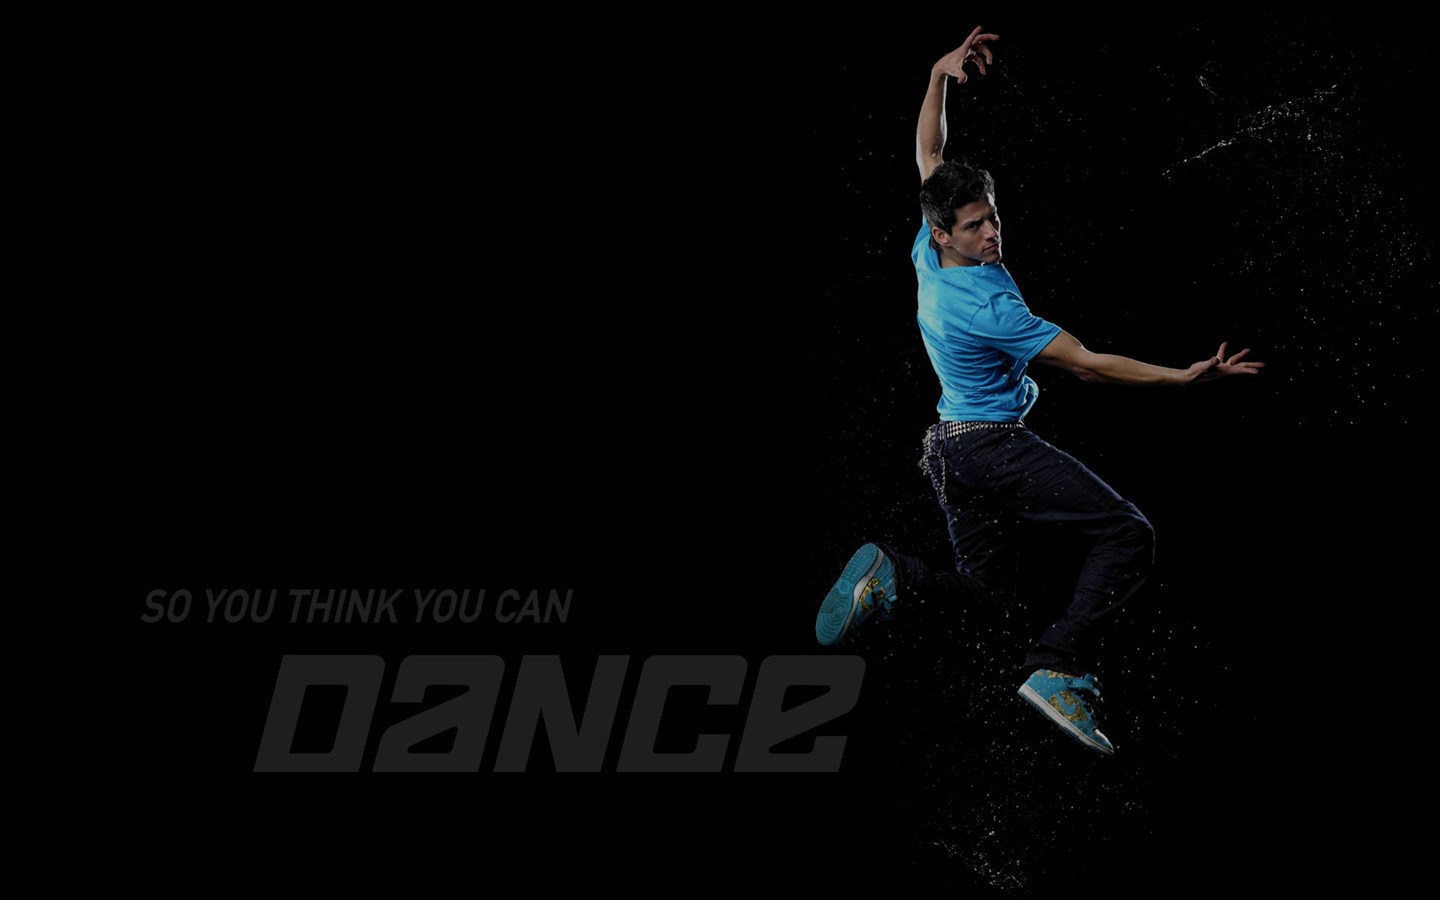 So You Think You Can Dance 舞林争霸 壁纸(二)18 - 1440x900